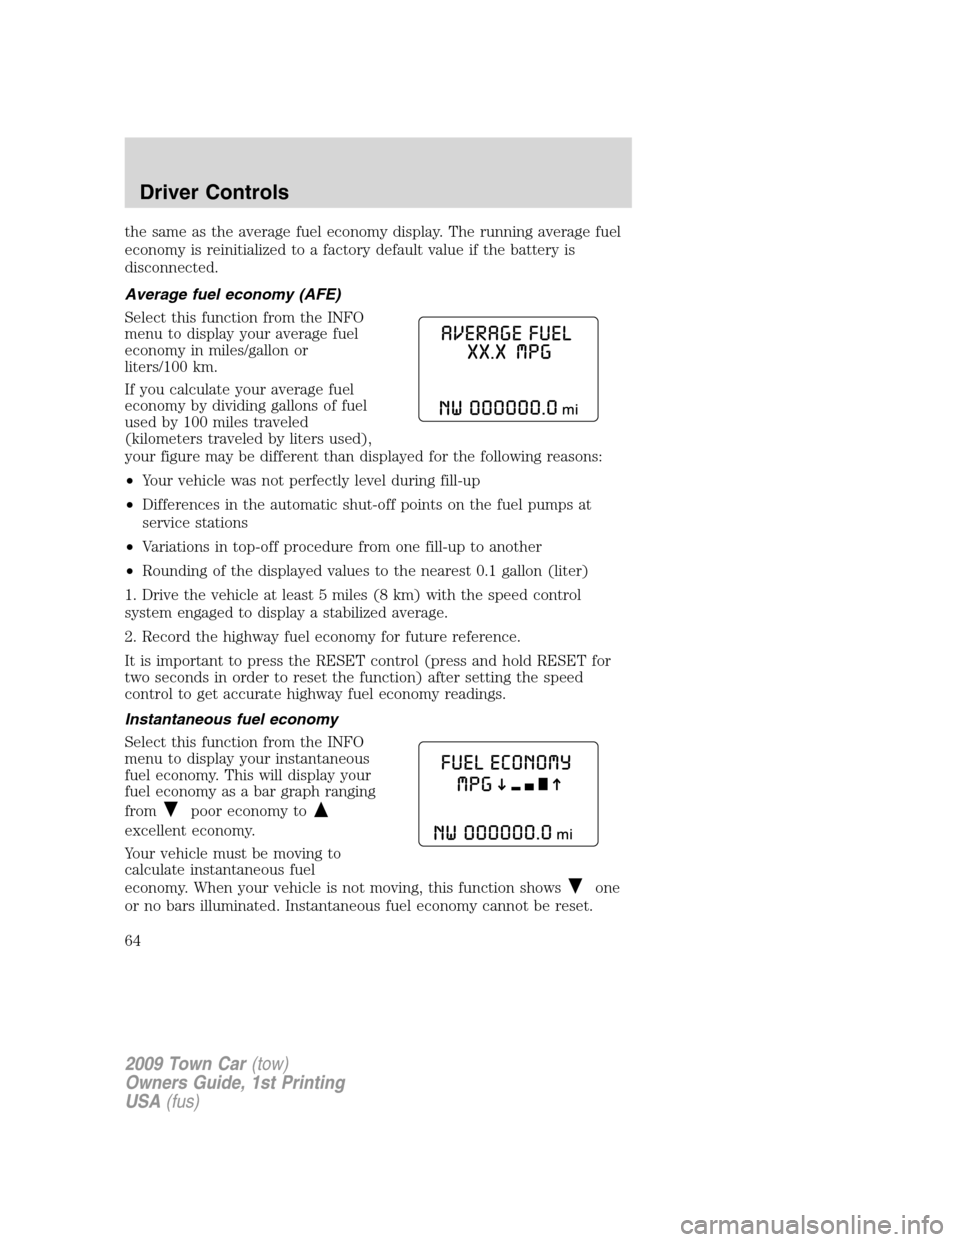 LINCOLN TOWN CAR 2009  Owners Manual the same as the average fuel economy display. The running average fuel
economy is reinitialized to a factory default value if the battery is
disconnected.
Average fuel economy (AFE)
Select this functi